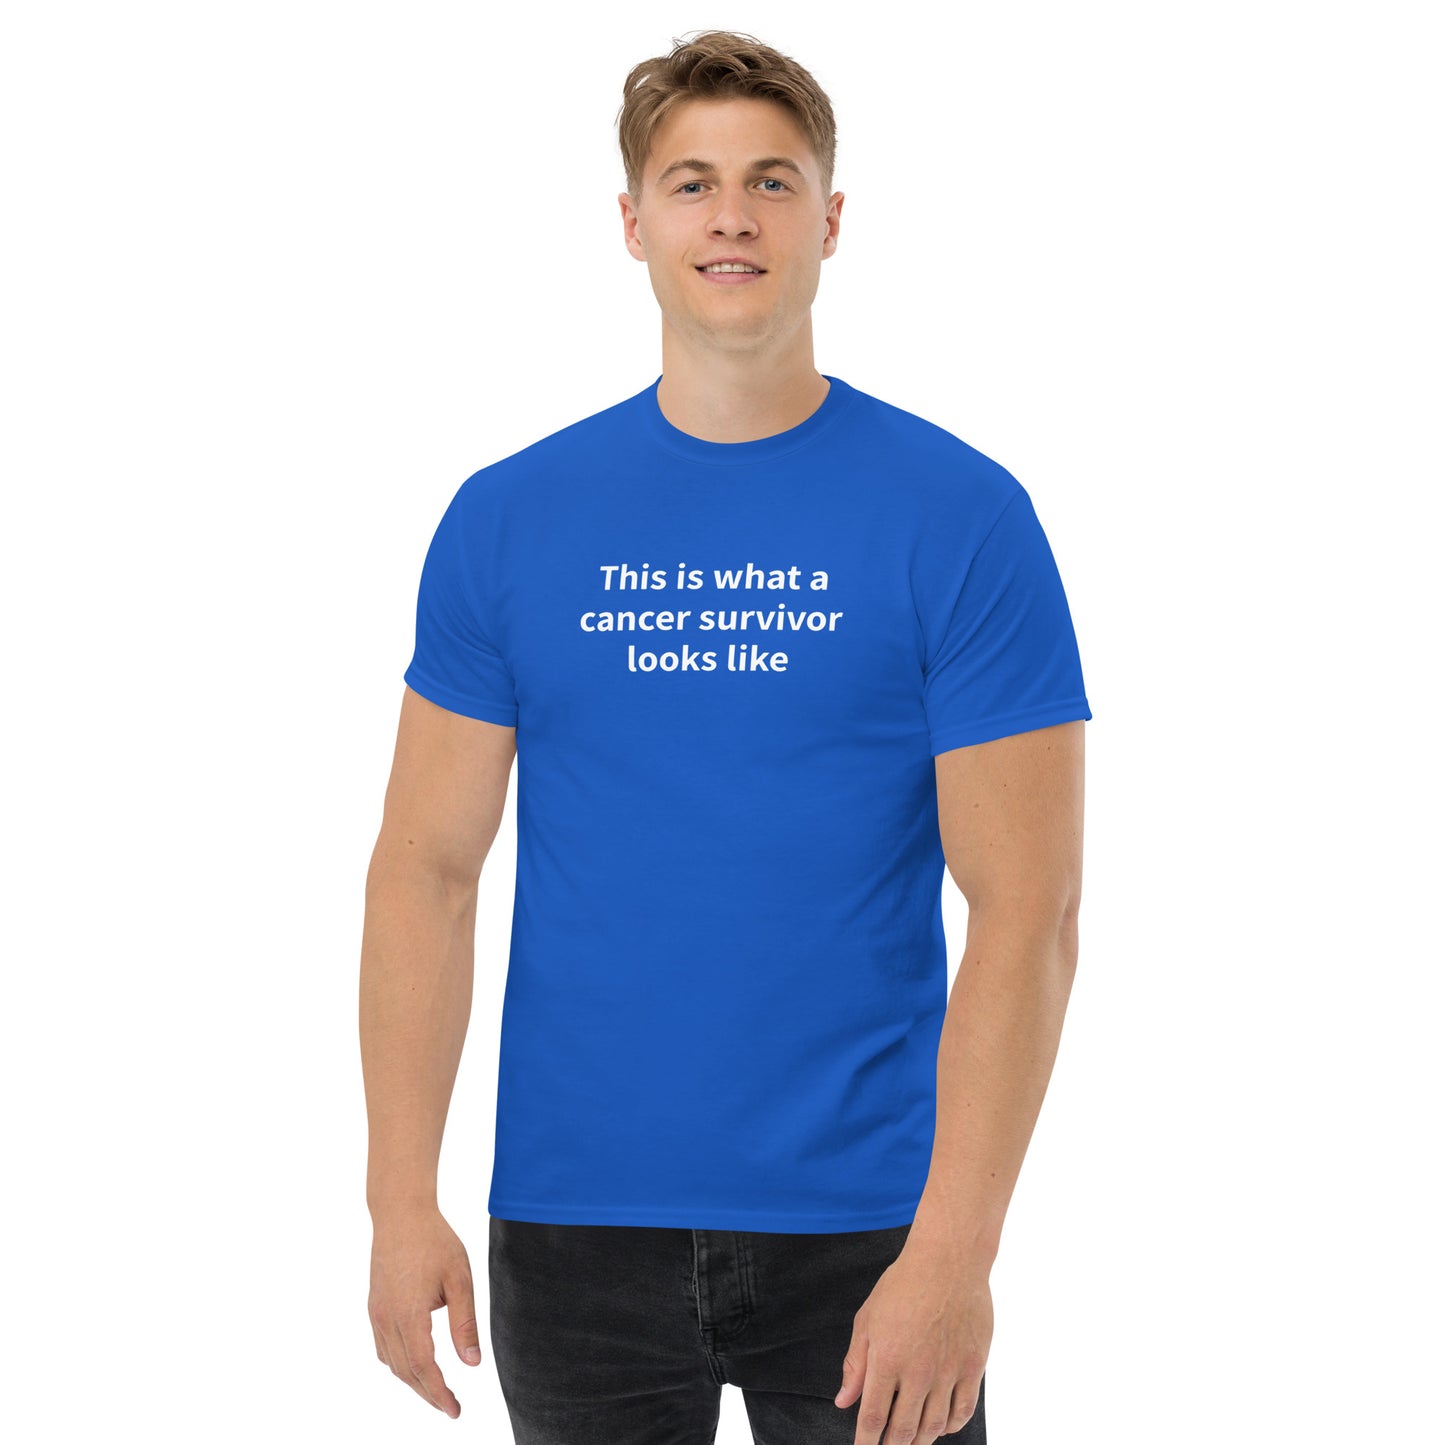 This is what a cancer survivor looks like short sleeve t-shirt (unisex)